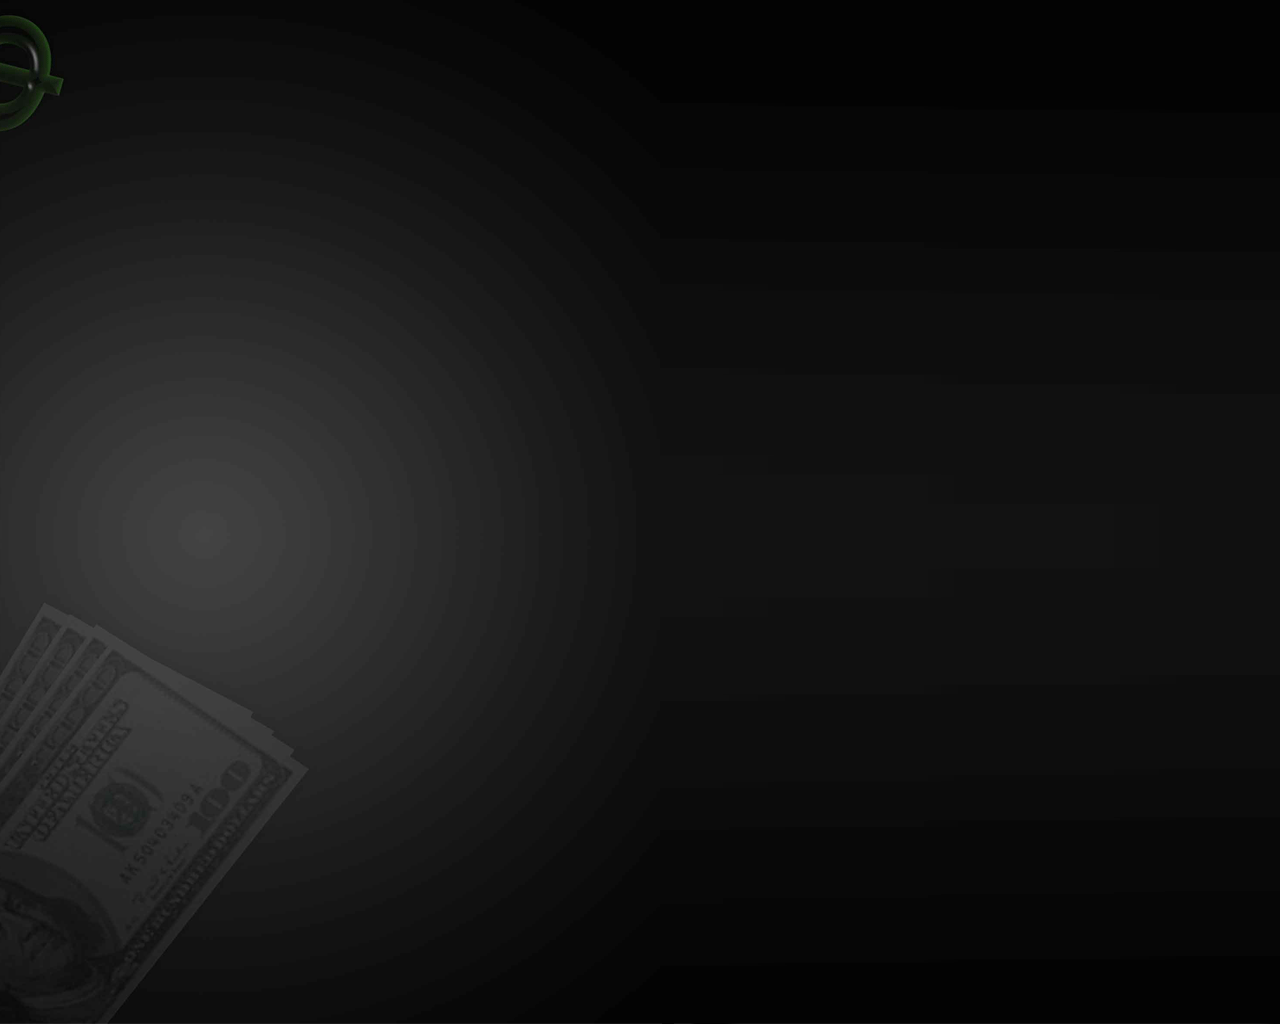 Money On Black Abstract Template free powerpoint background